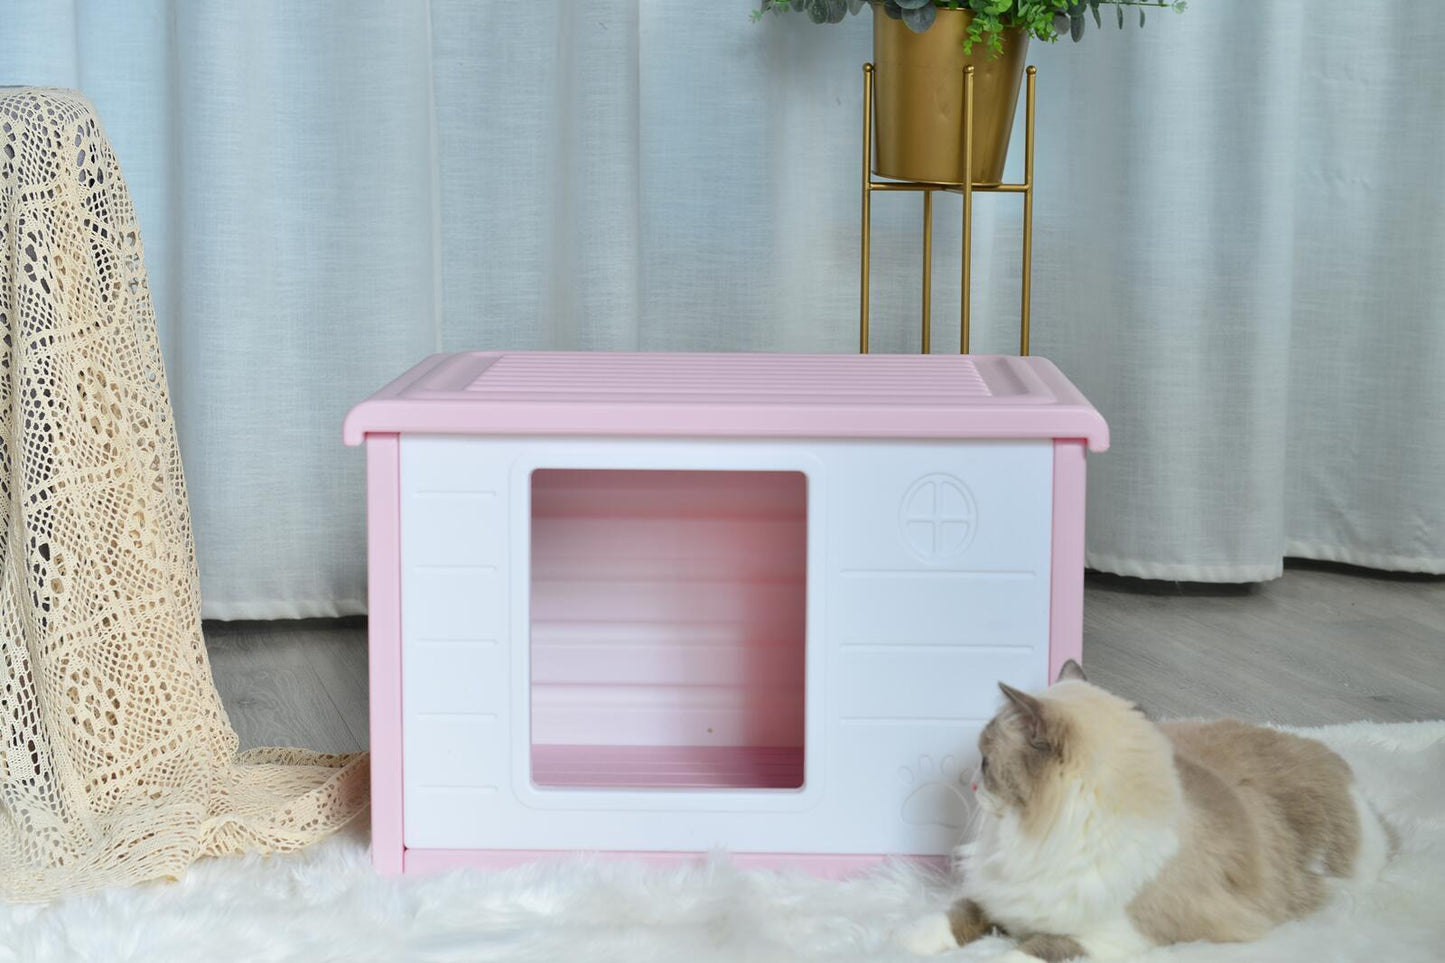 YES4PETS Small Plastic Pet Dog Puppy Cat House Kennel Pink